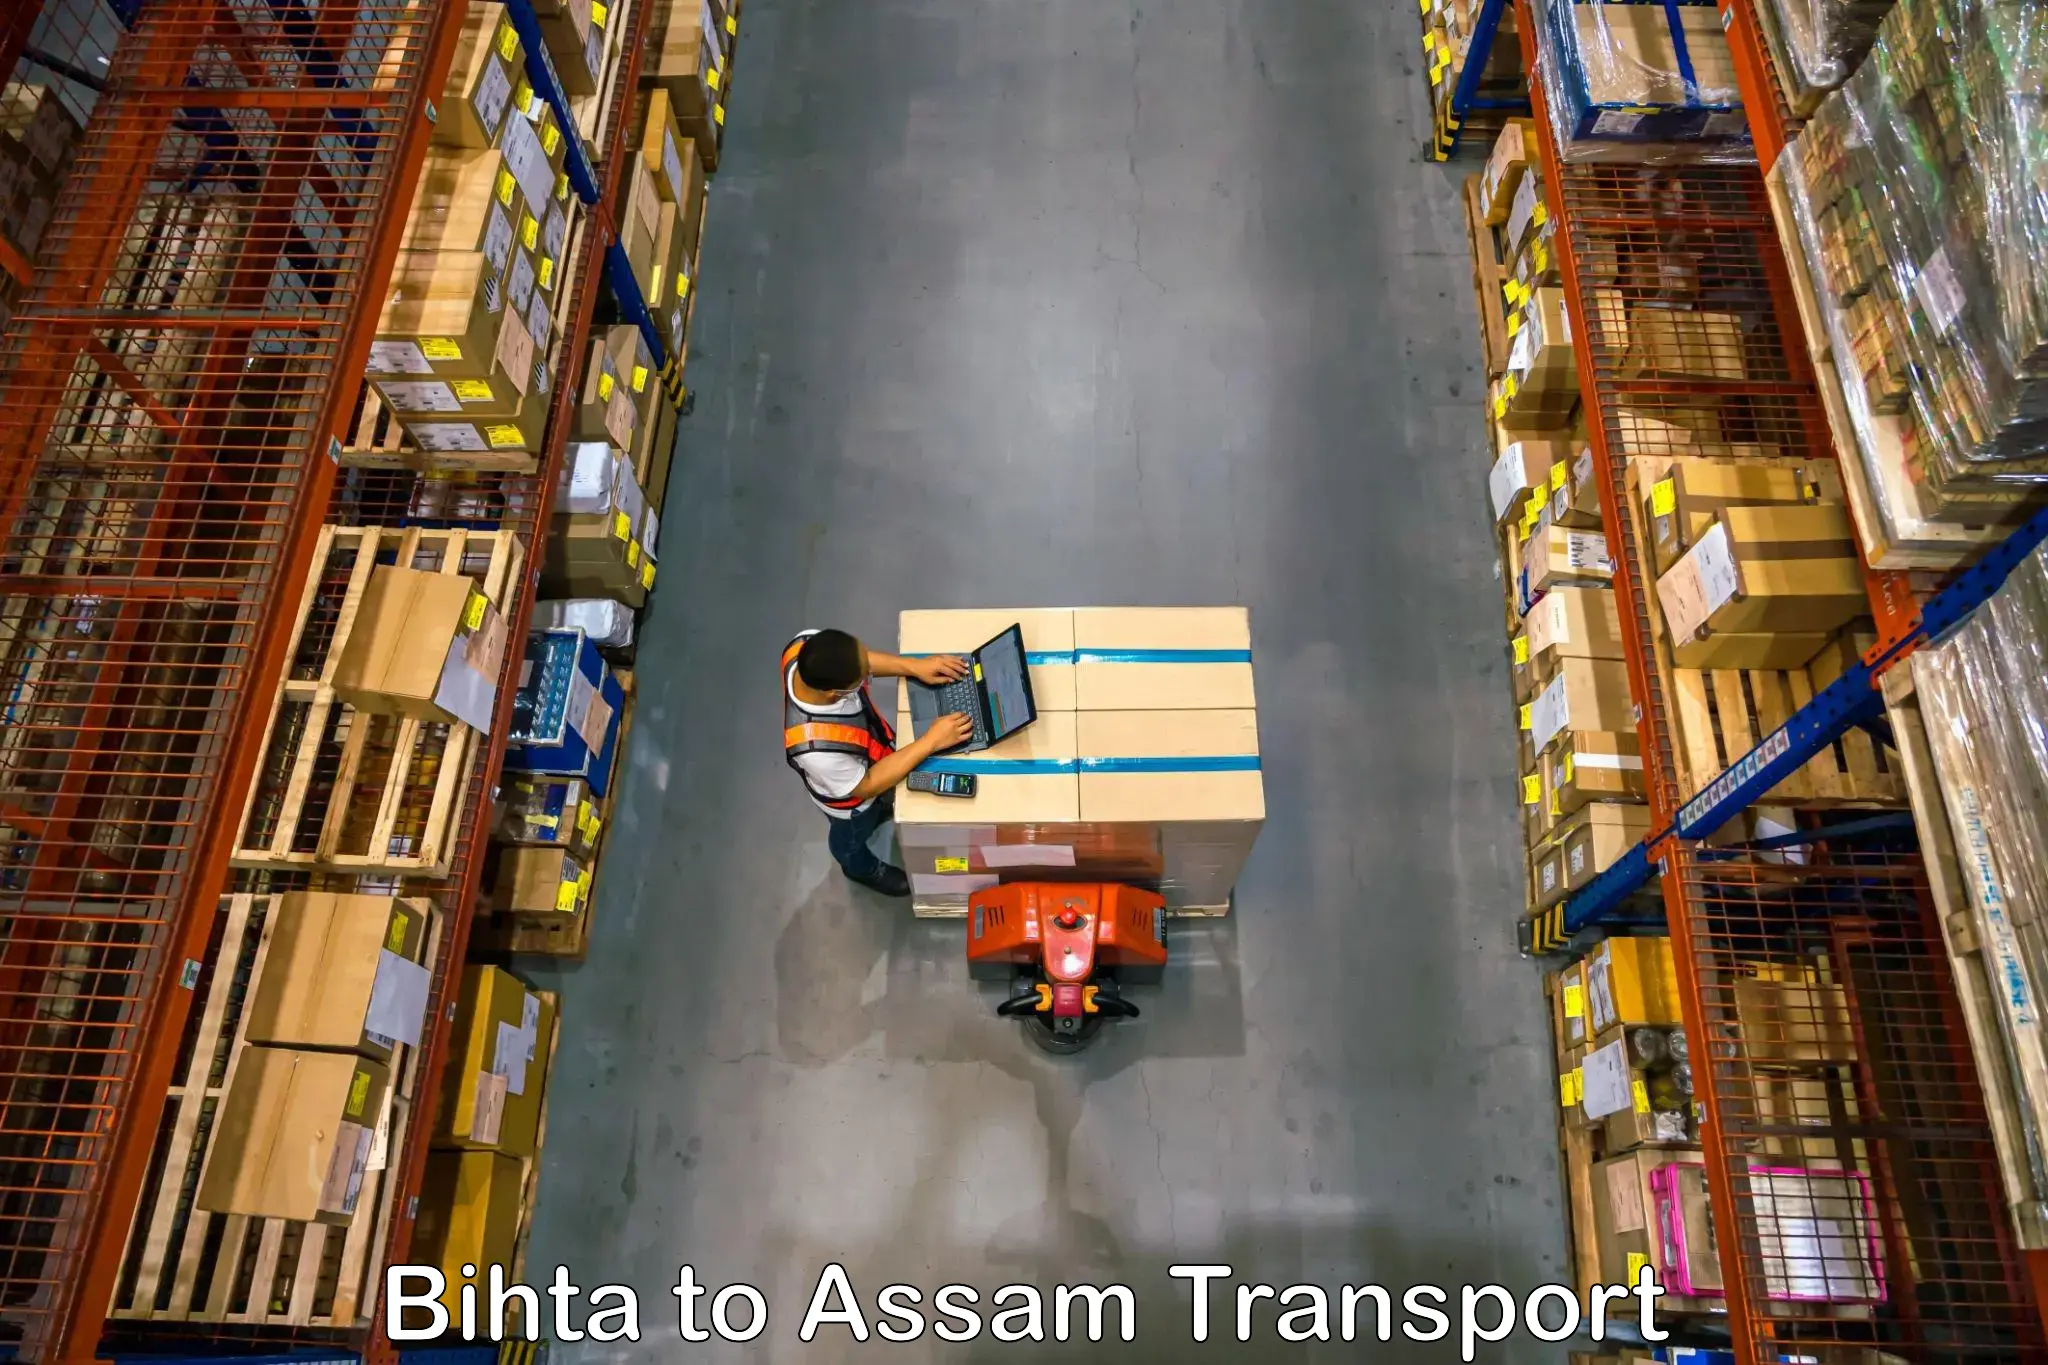 Container transport service Bihta to Assam